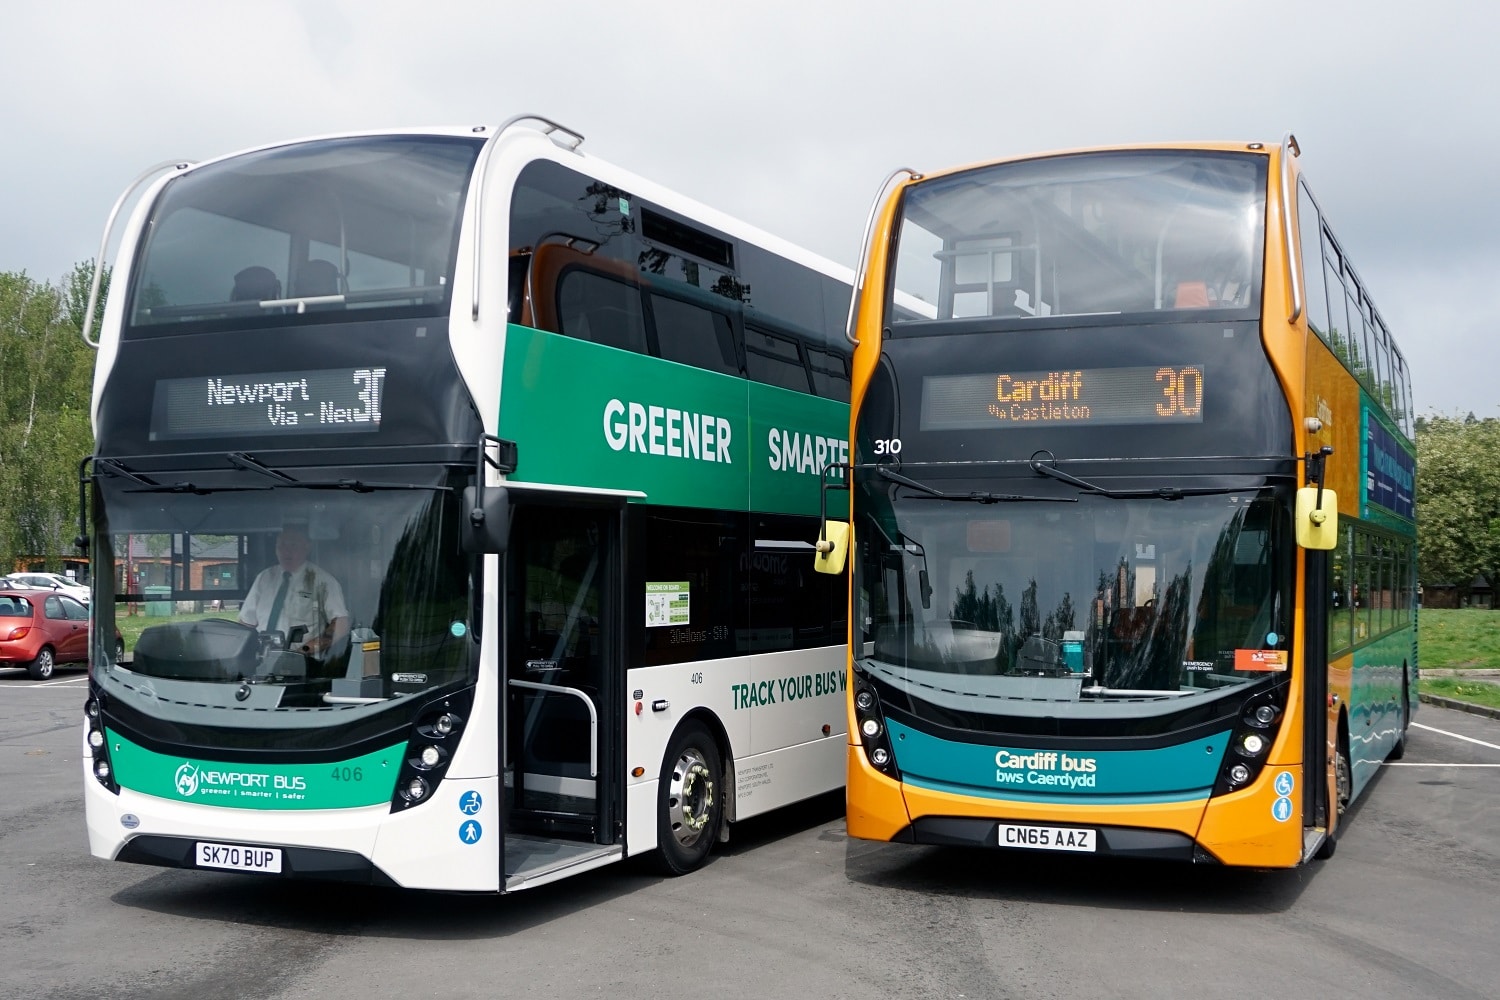 Bus franchising in Wales white paper